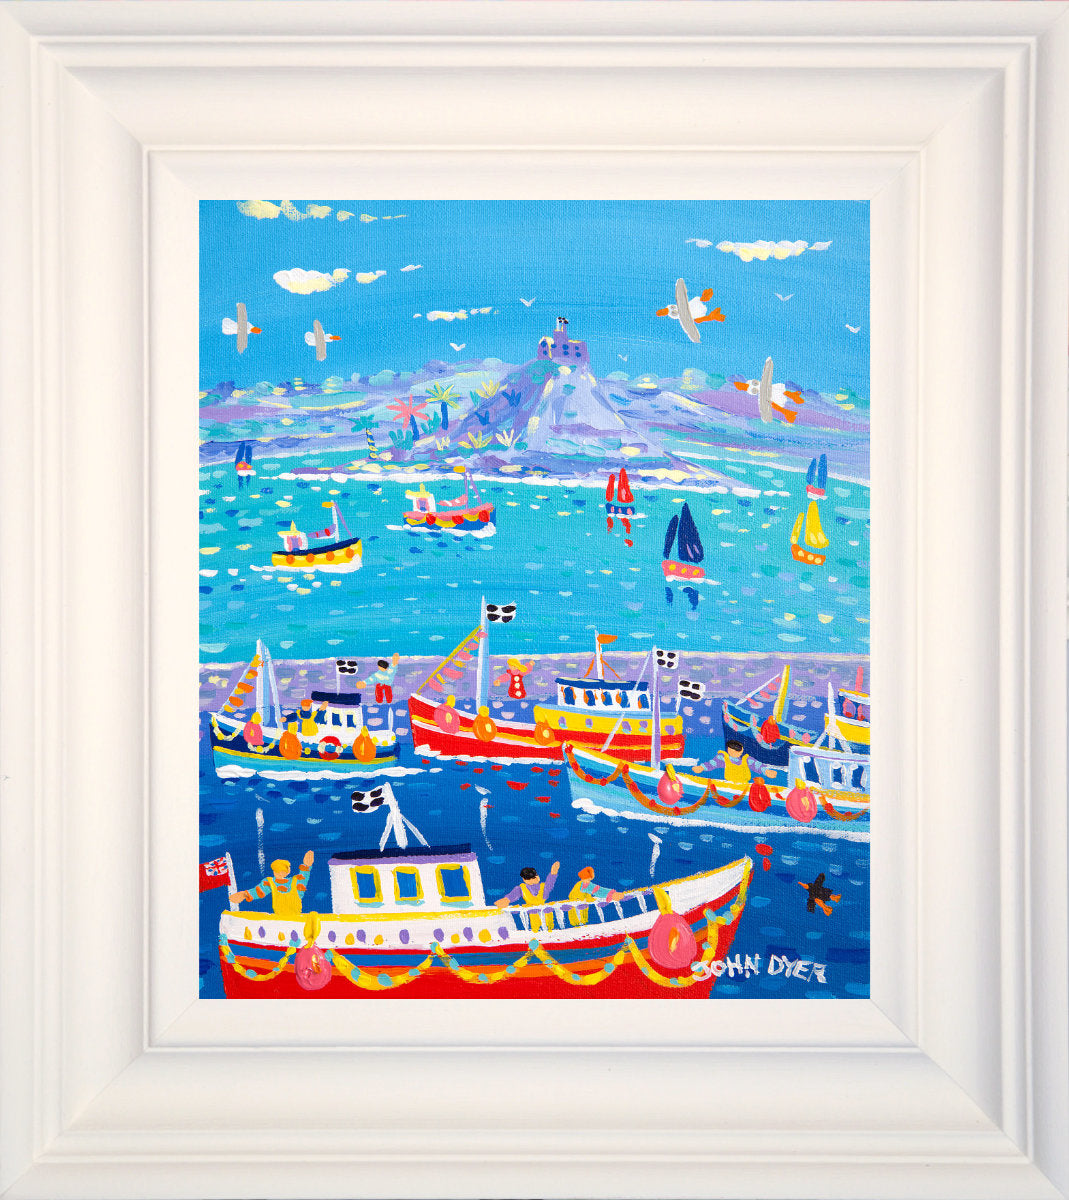 'Looking across Newlyn', 12 x 10 inches acrylic on canvas. Cornwall Art Gallery Original Art Painting by Cornish Artist John Dyer